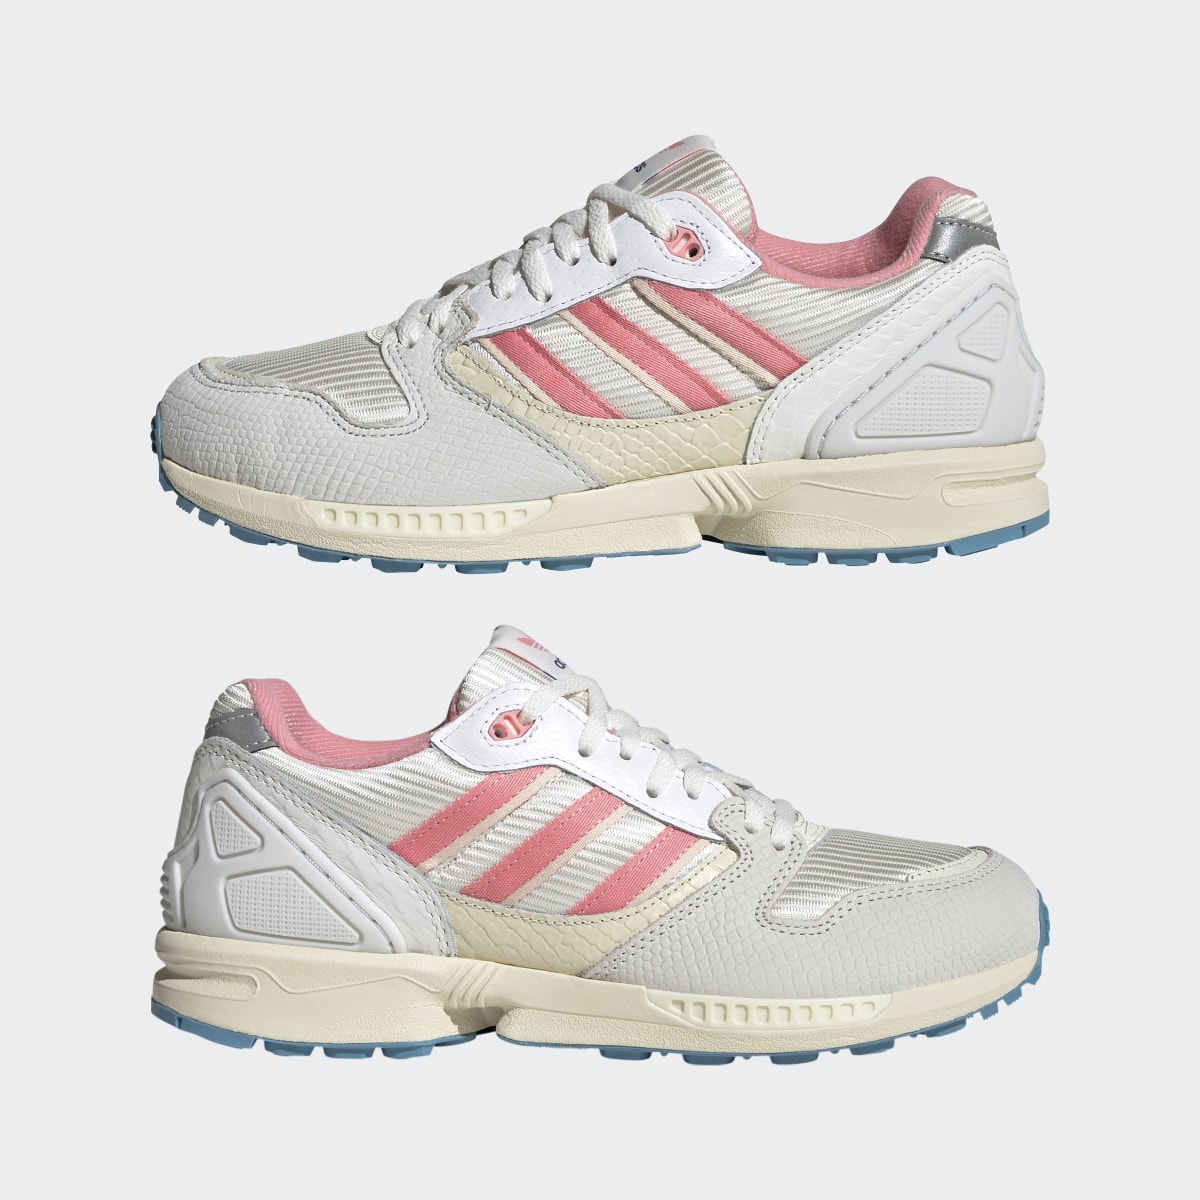 Adidas ZX 5020 Shoes. 8